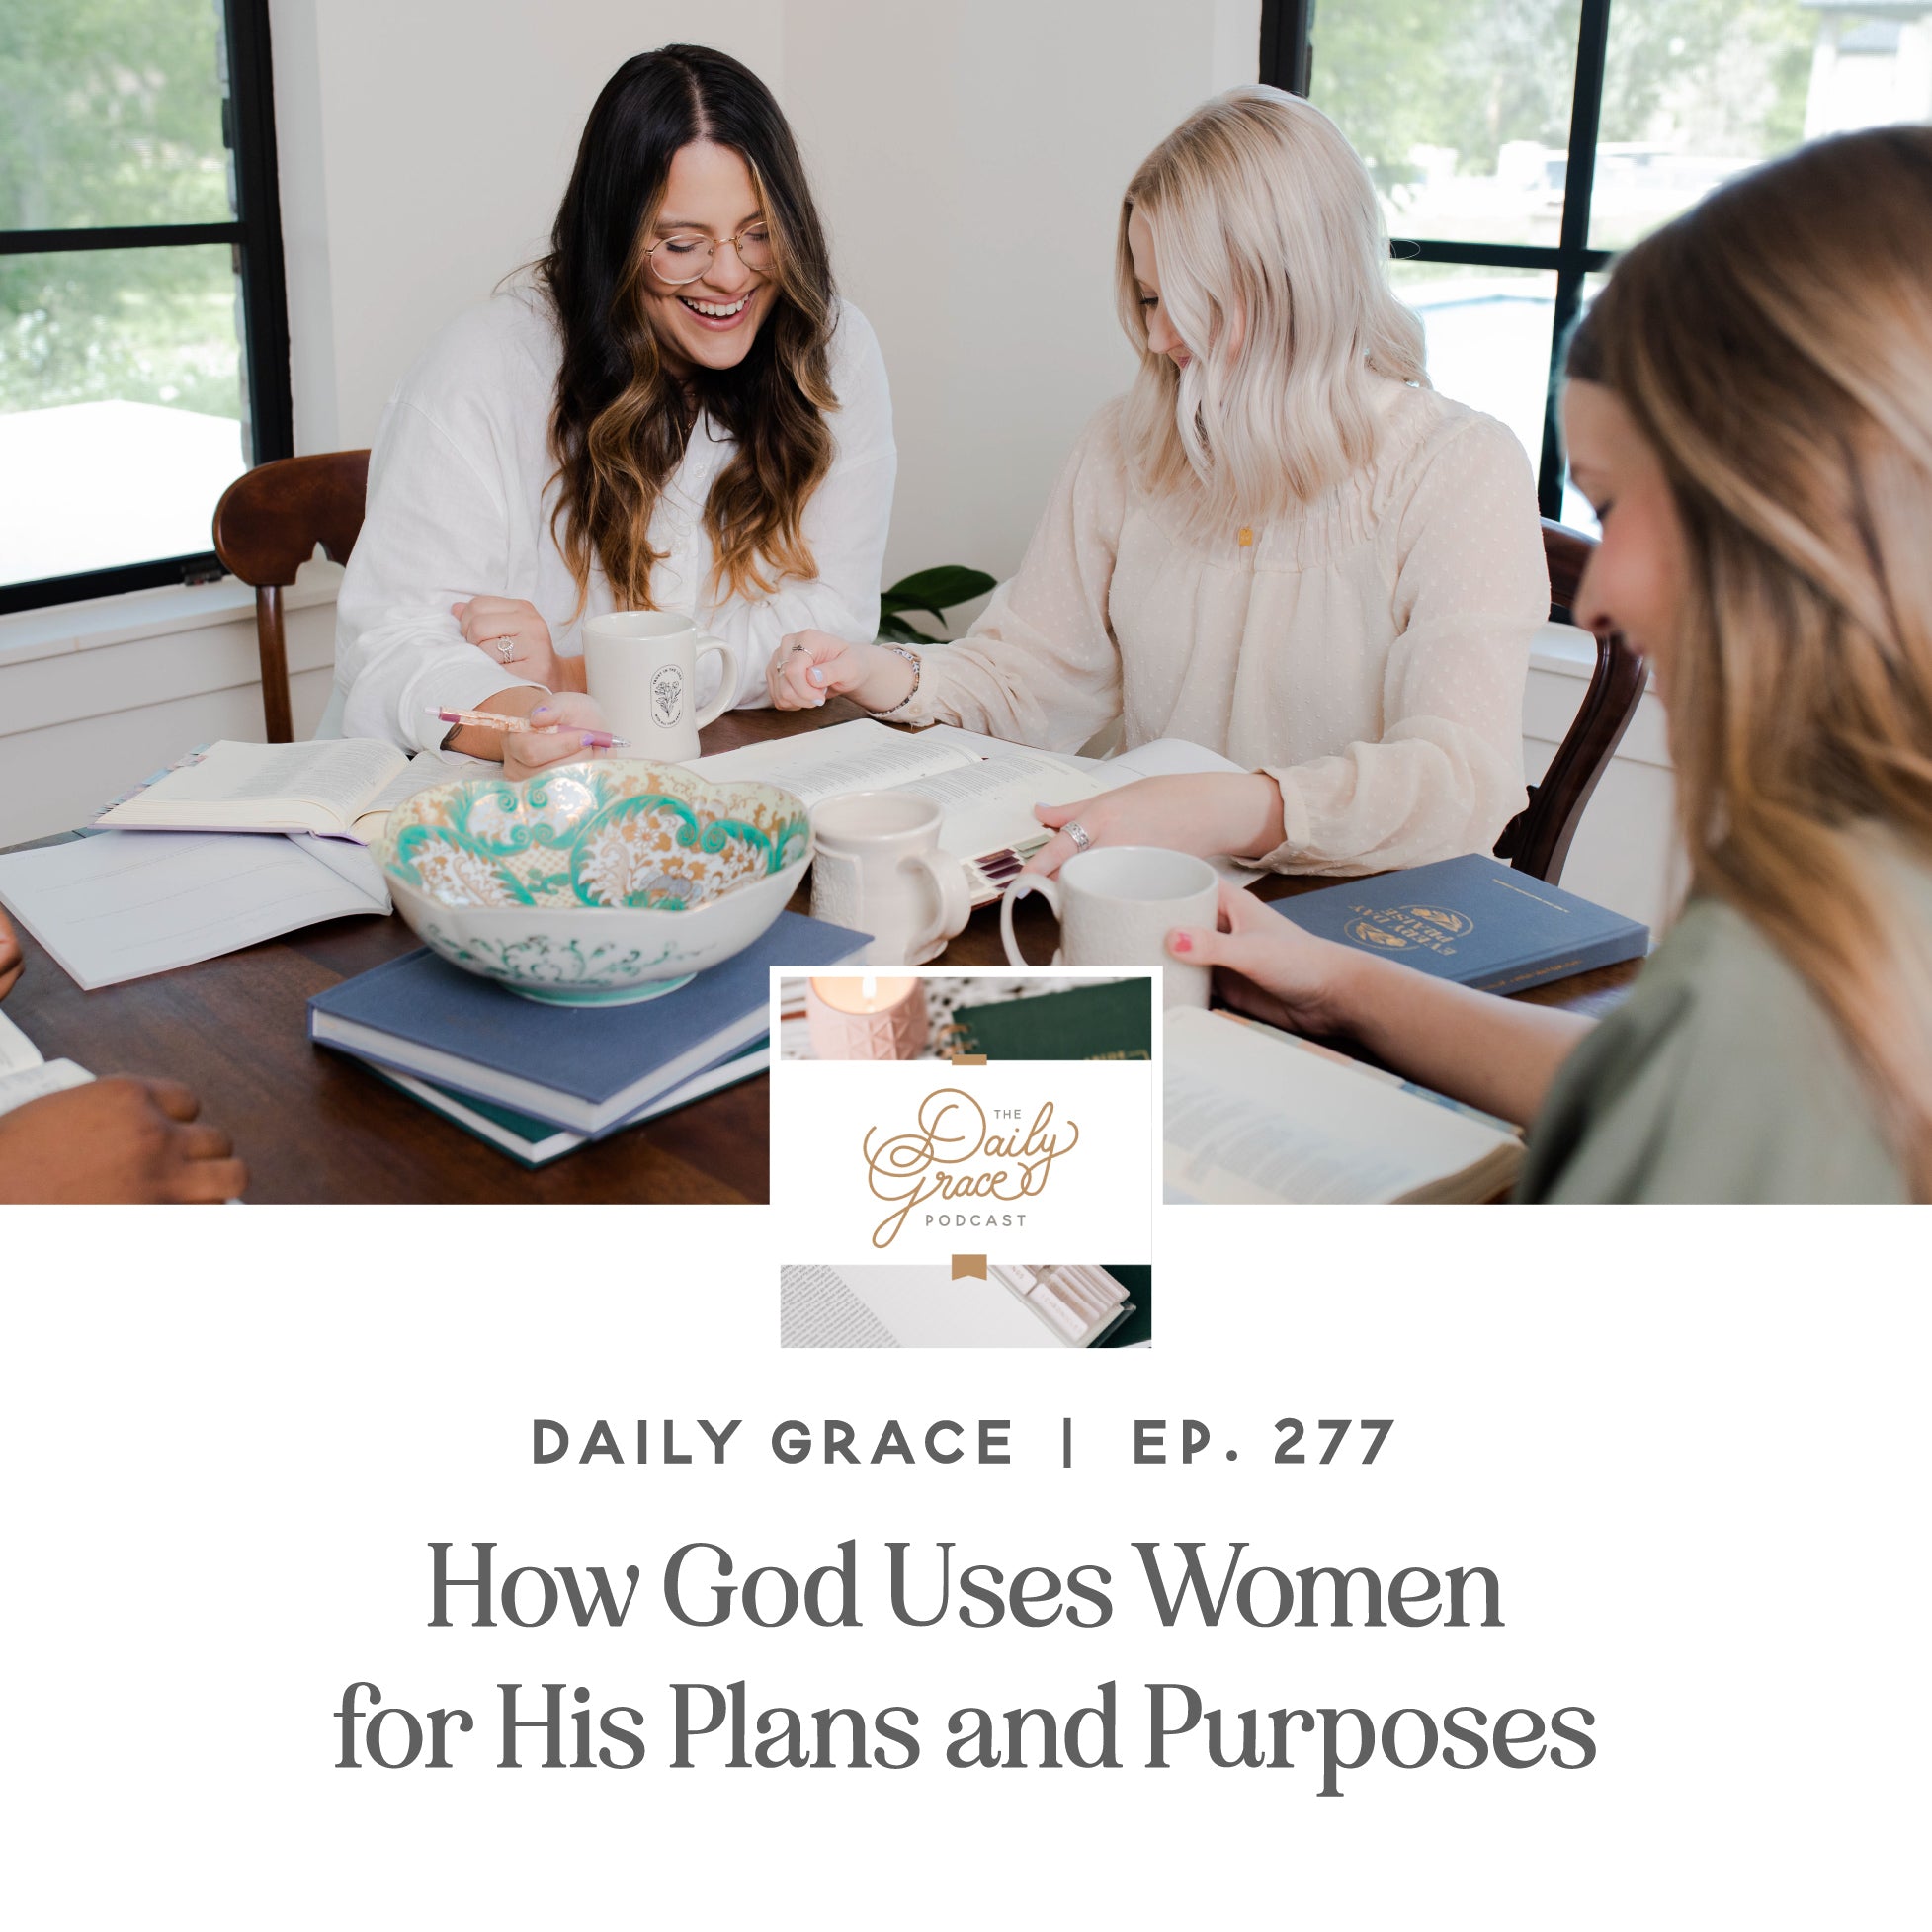 How God Uses Women in His Plans and Purposes | TDGC